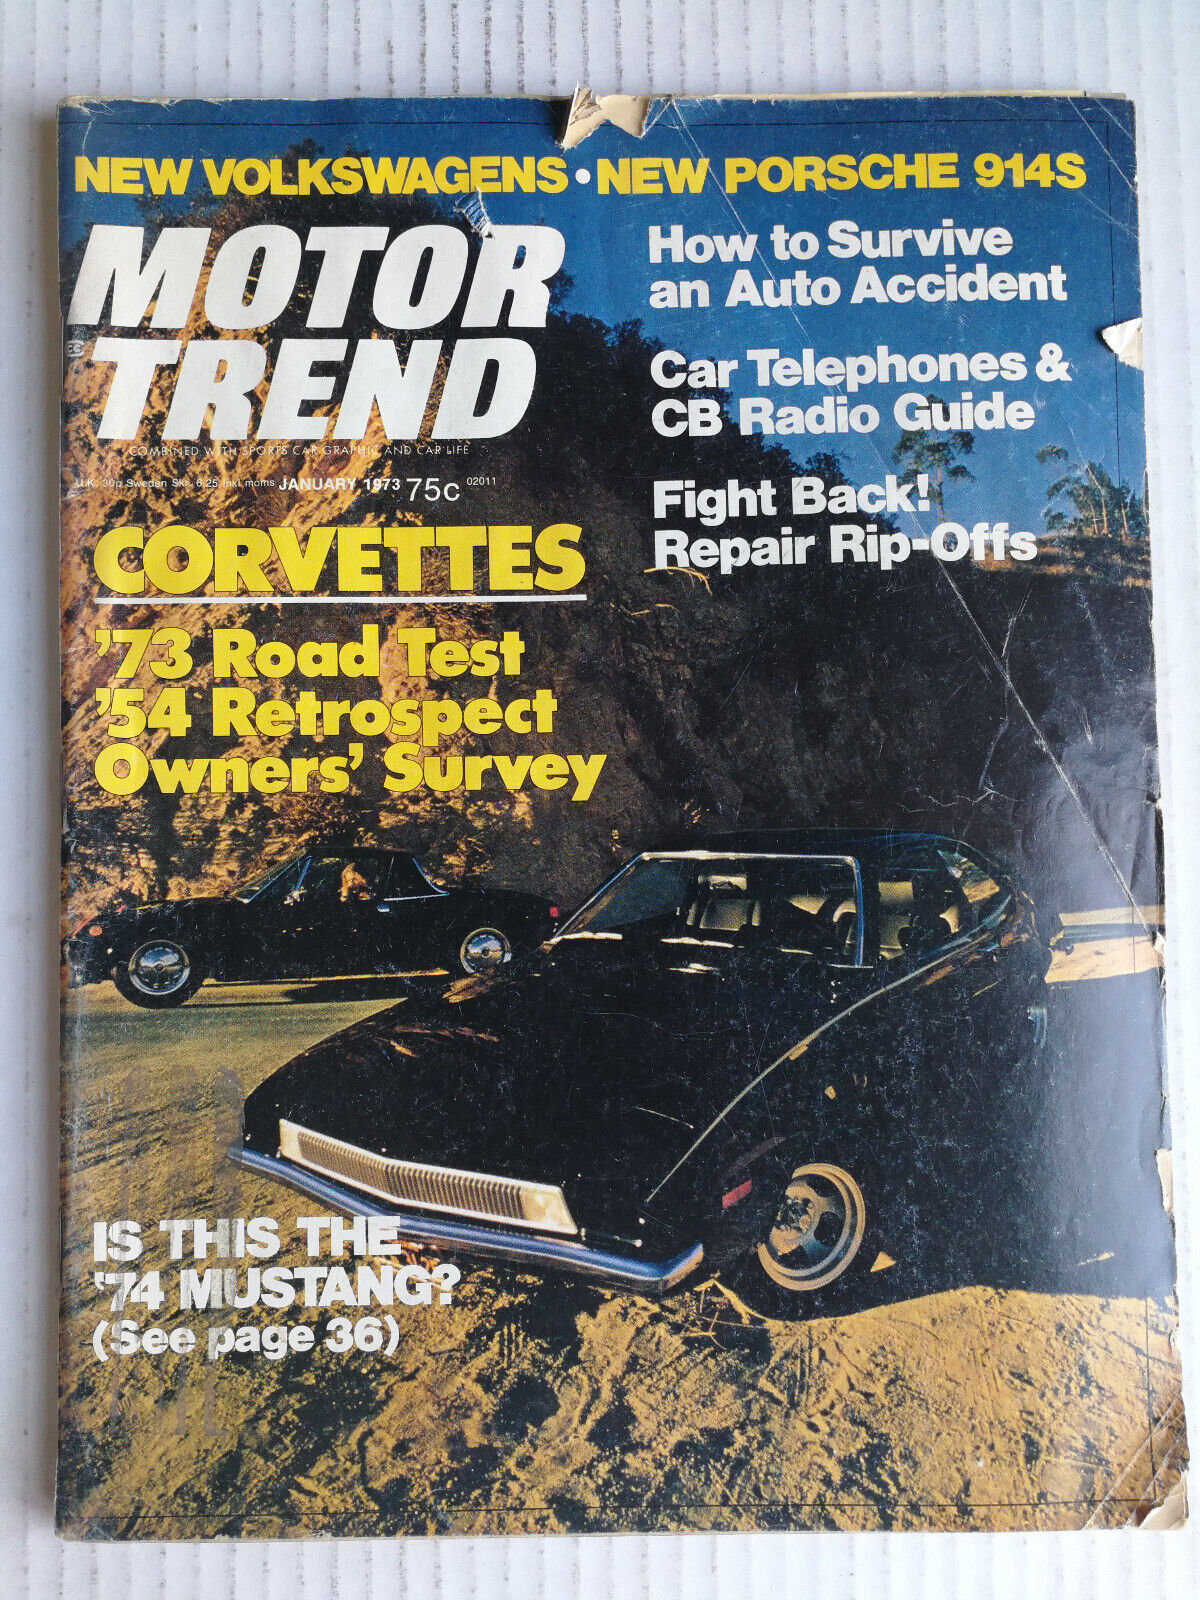 Motor Trend Magazine 1973 - The Complete Year - All 12 Issues